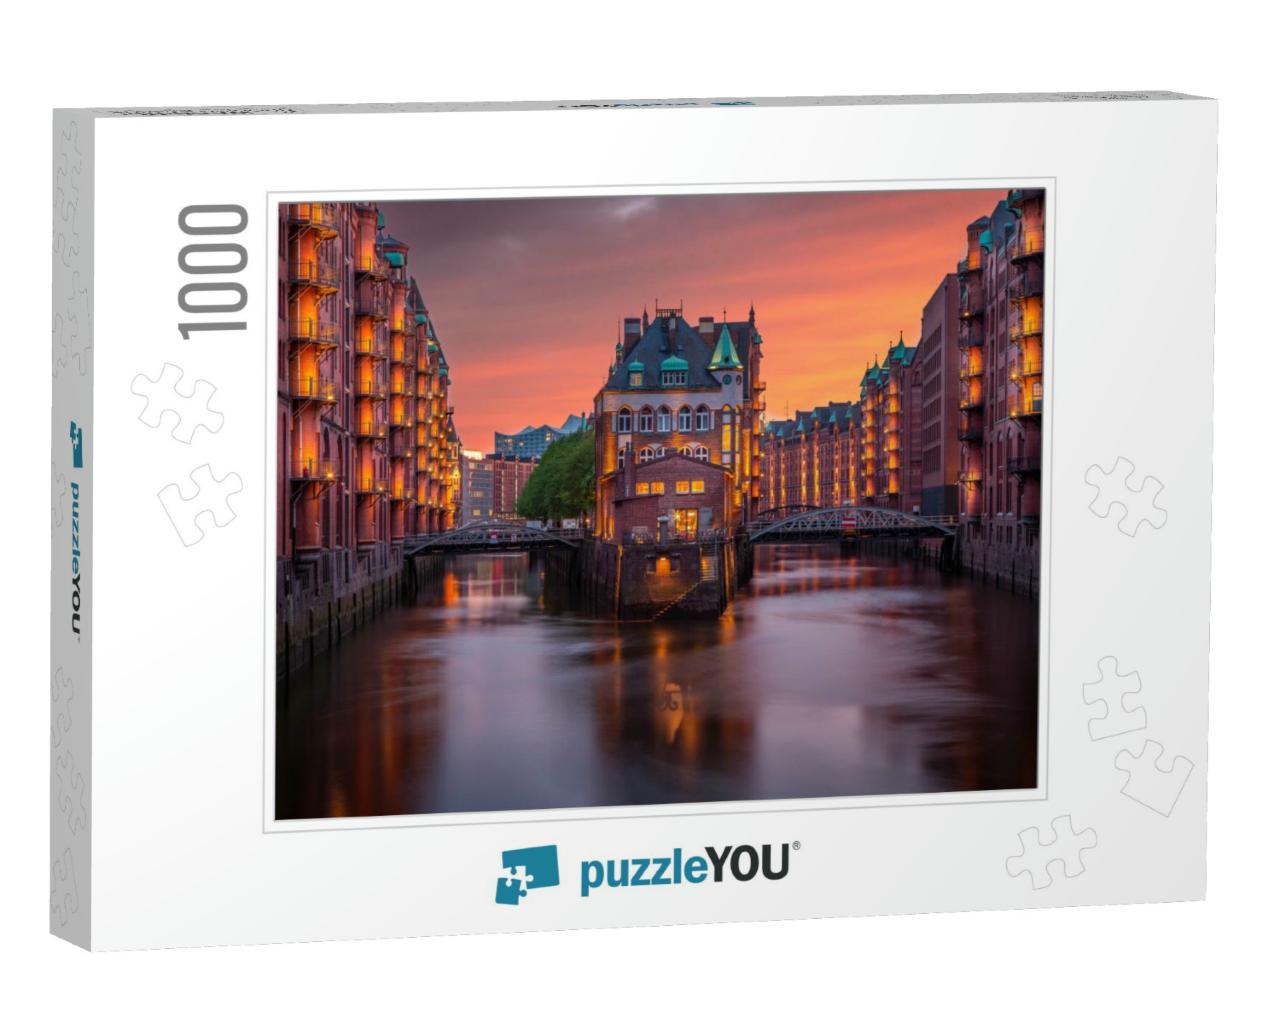 Shipping Docks in Hamburg Germany... Jigsaw Puzzle with 1000 pieces